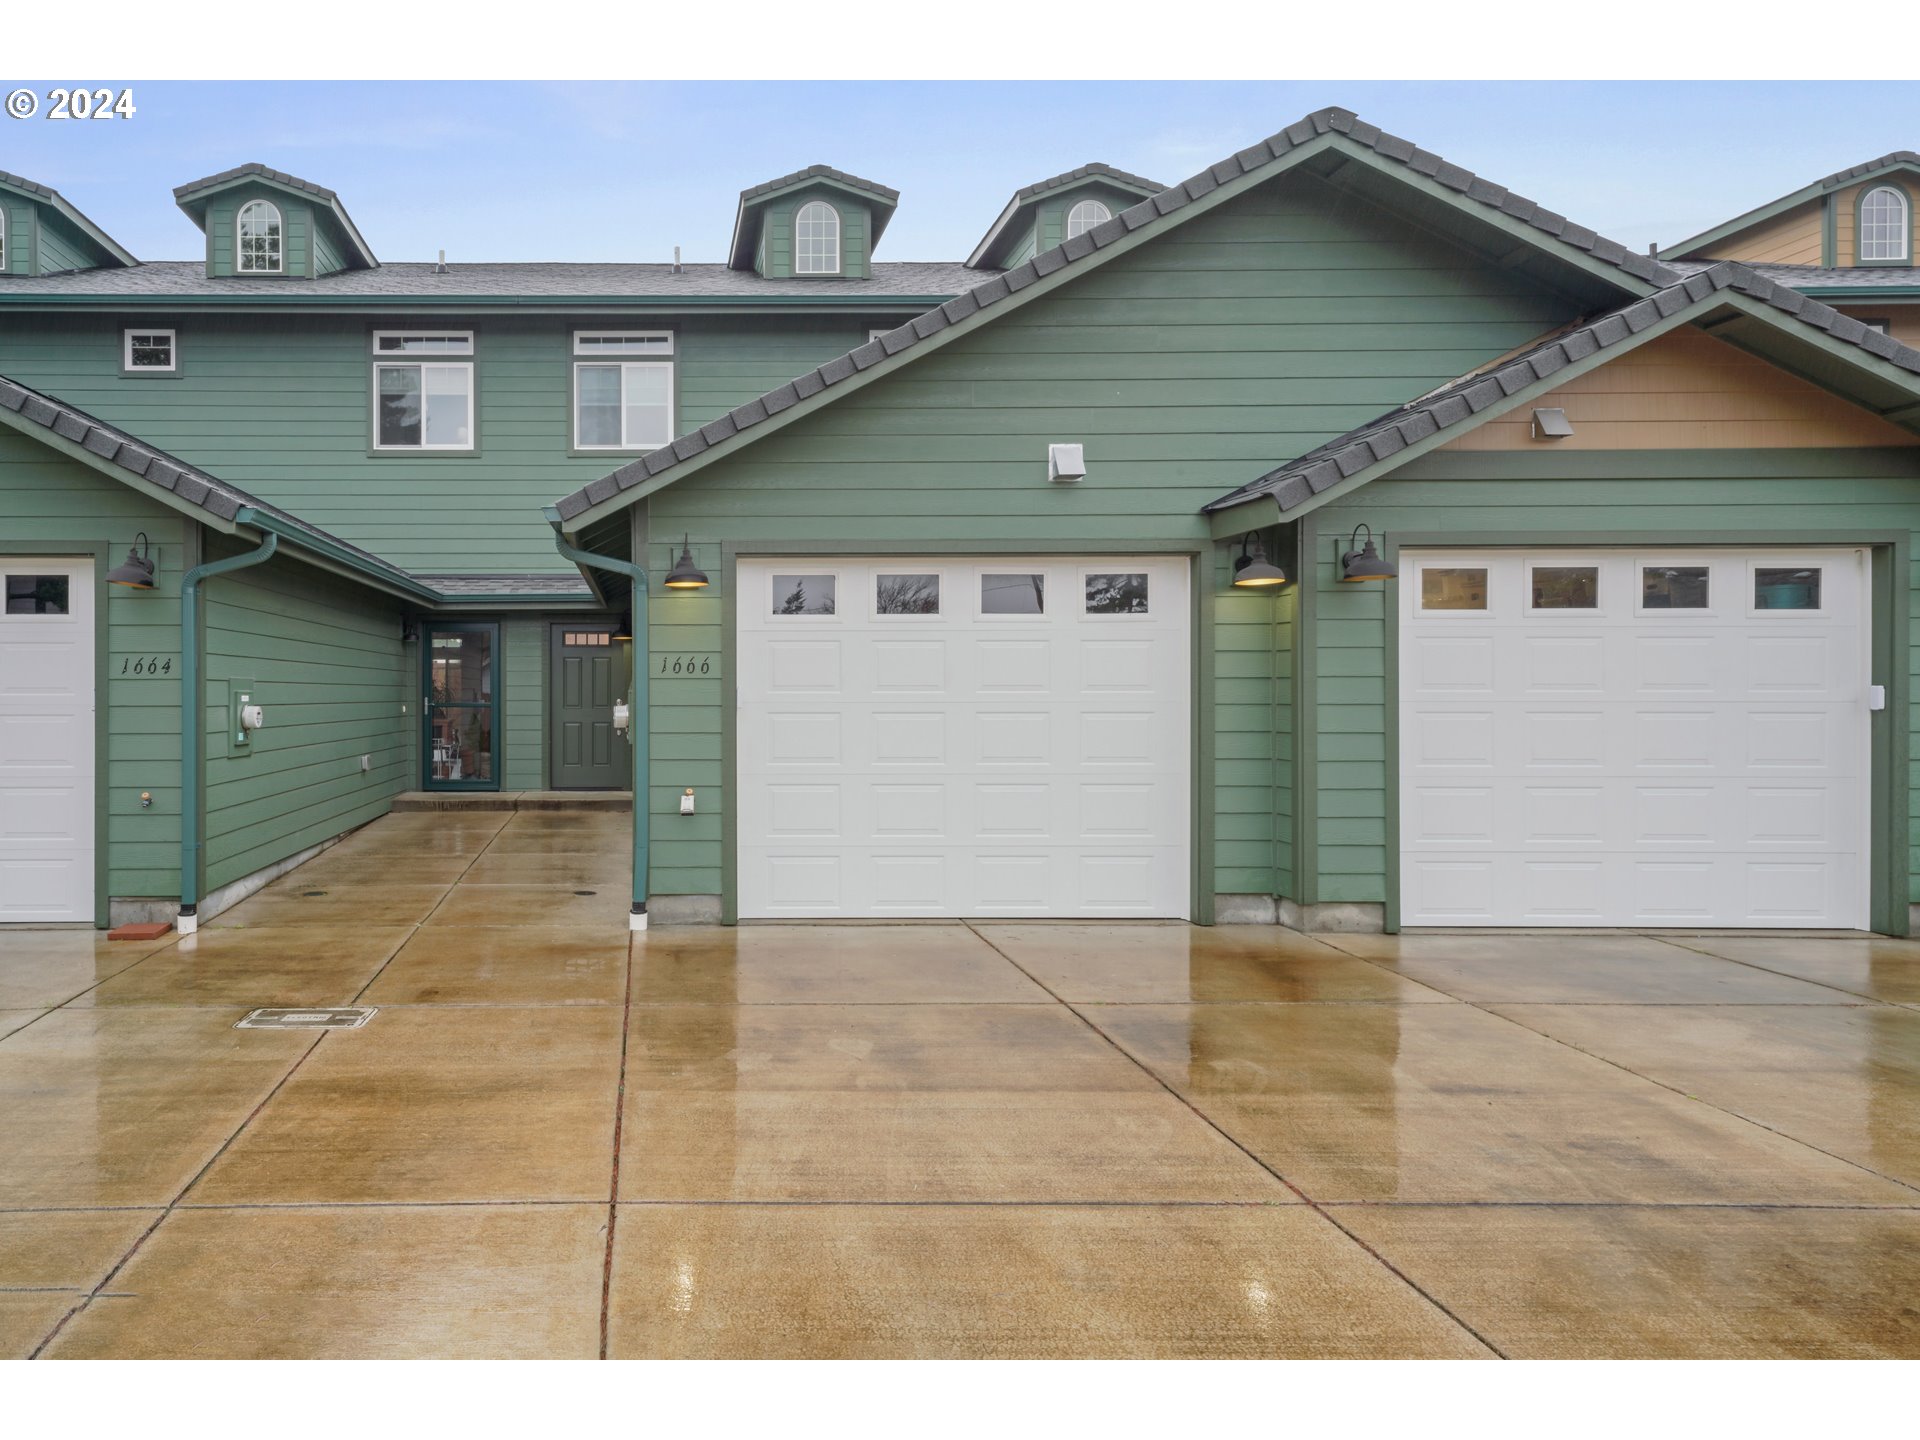 1666 32ND ST, Florence, OR 